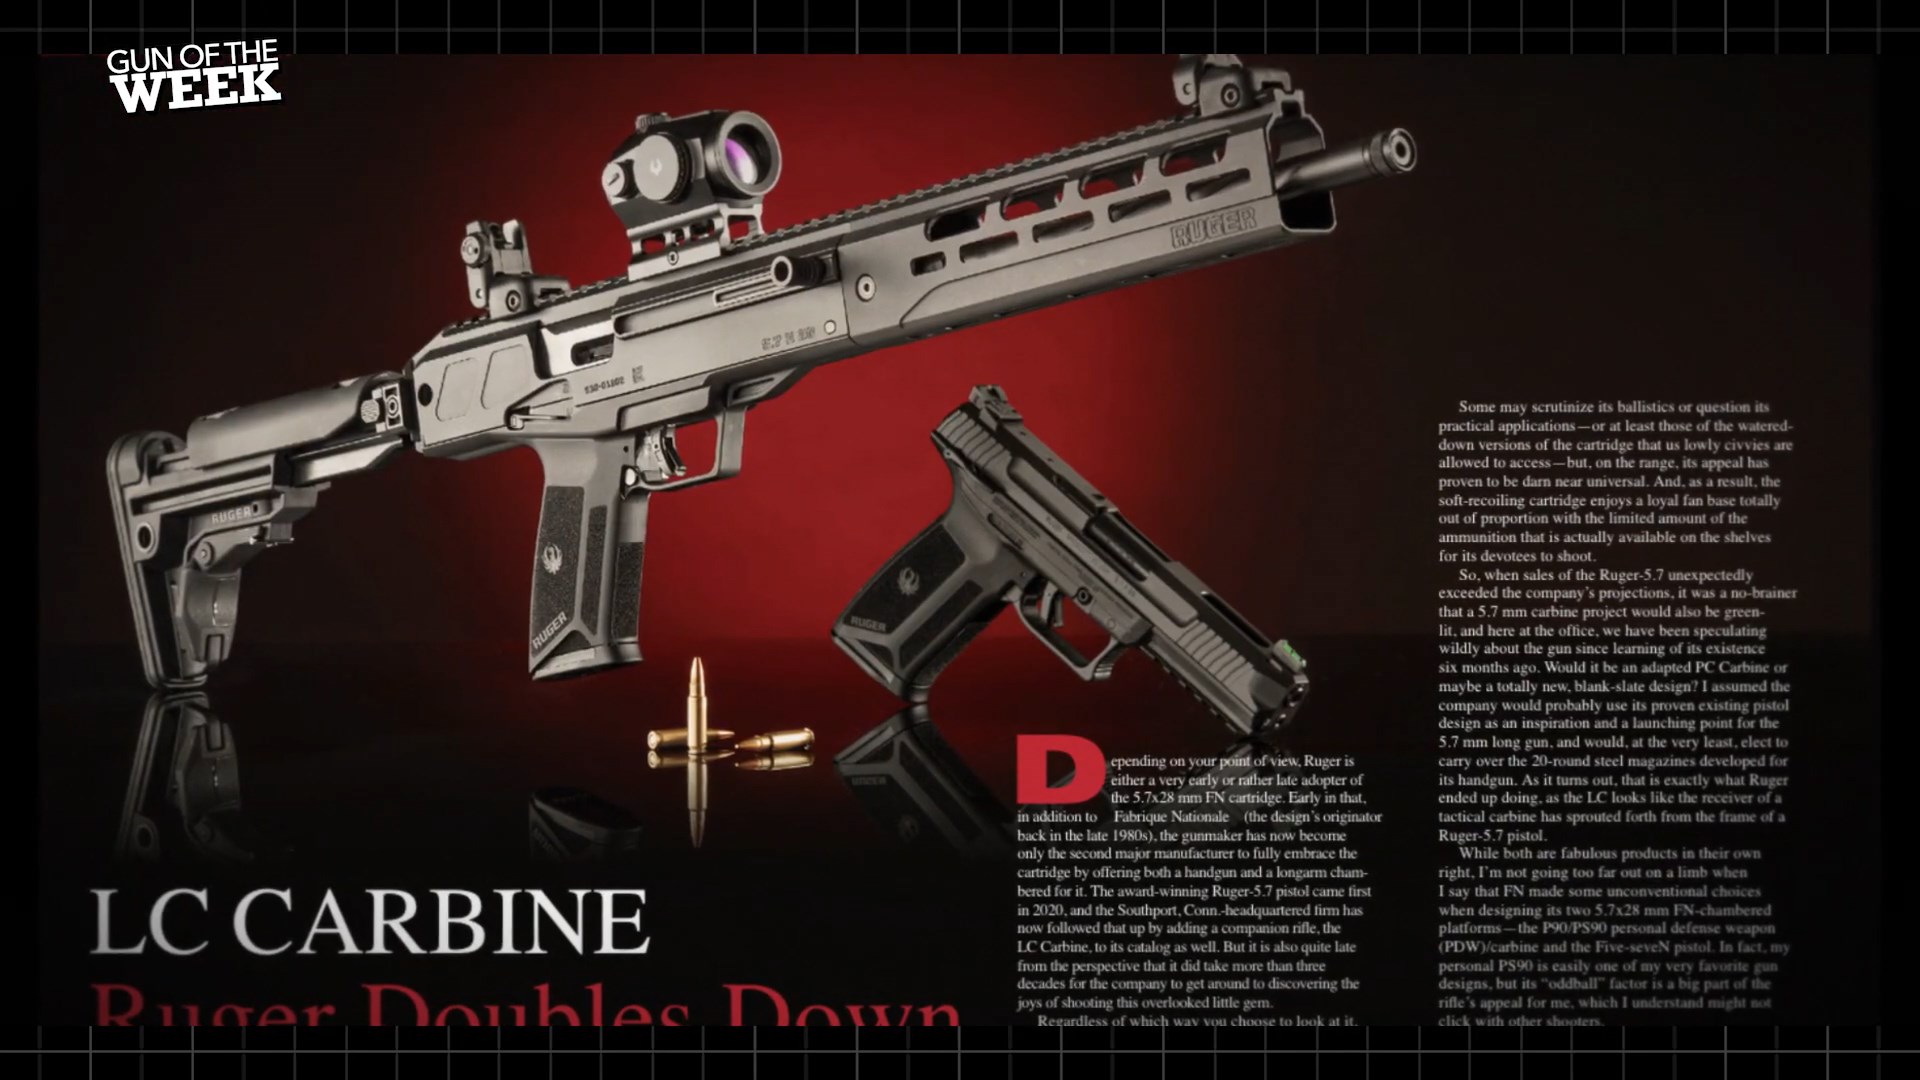 magazine centerfold spread showing ruger guns lc carbine ruger pistol red black text on image